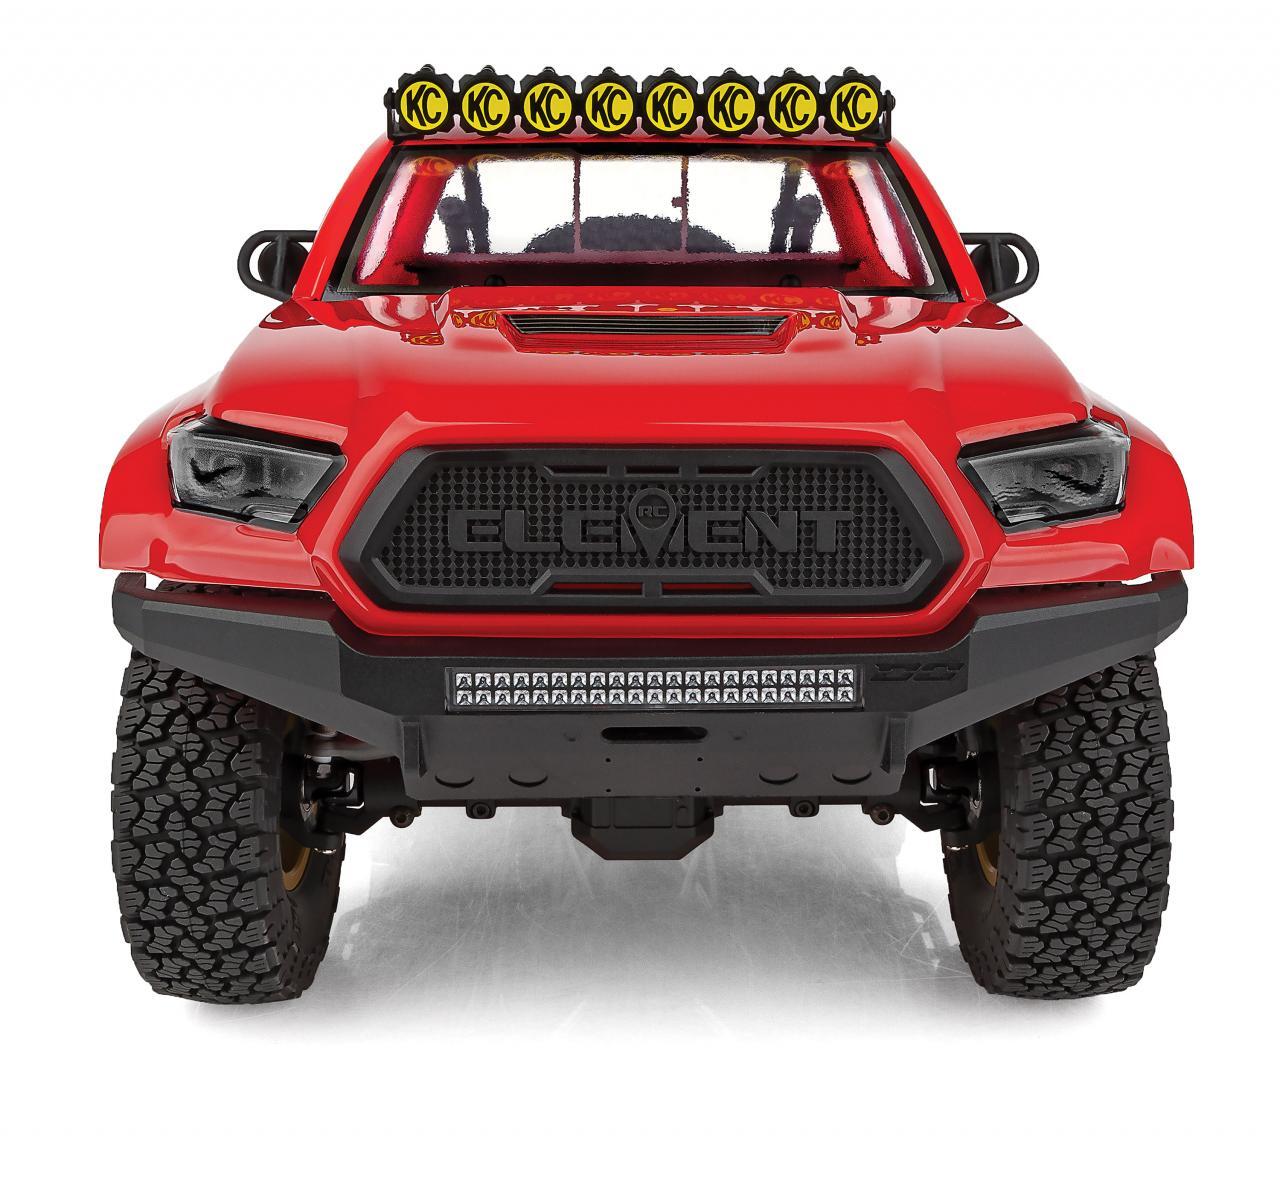 Team Associated Enduro Trail Truck, Knightrunner Rtr (Red) NEW - [Sunshine-Coast] - Team Associated - [RC-Car] - [Scale-Model]